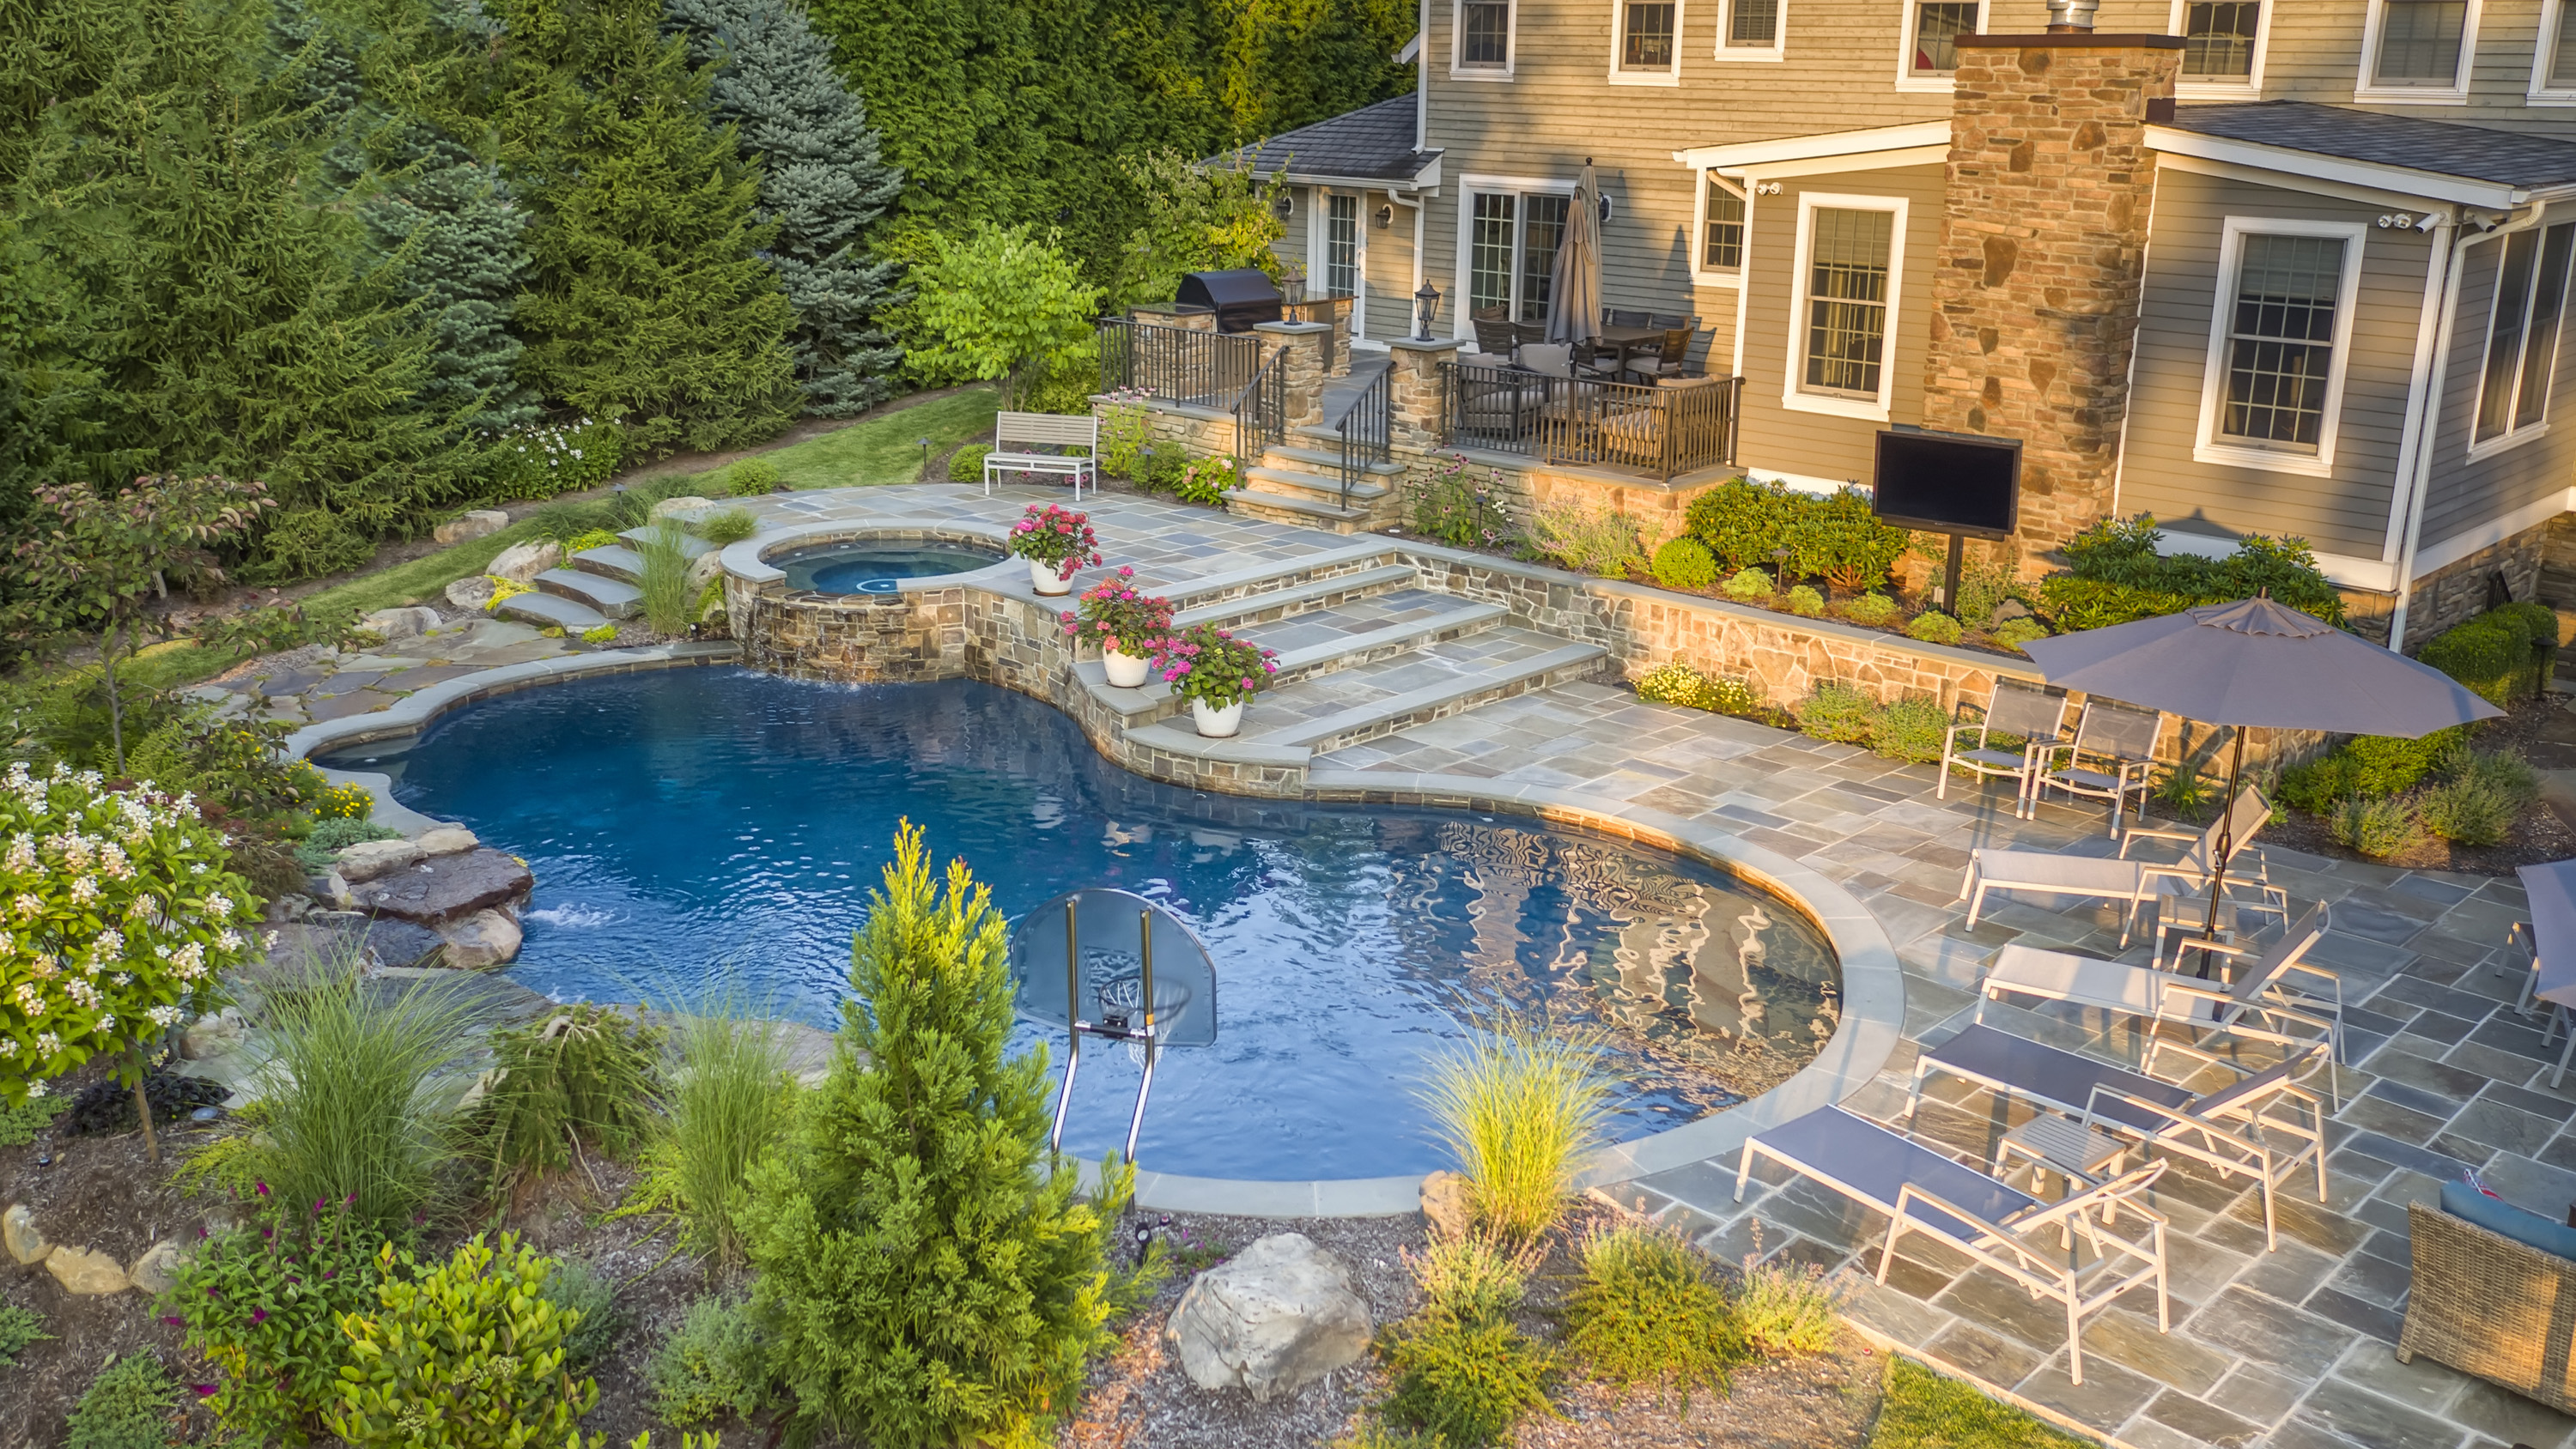 10 Creative Backyard Ideas With No Pool To Make The Most Of Your Space